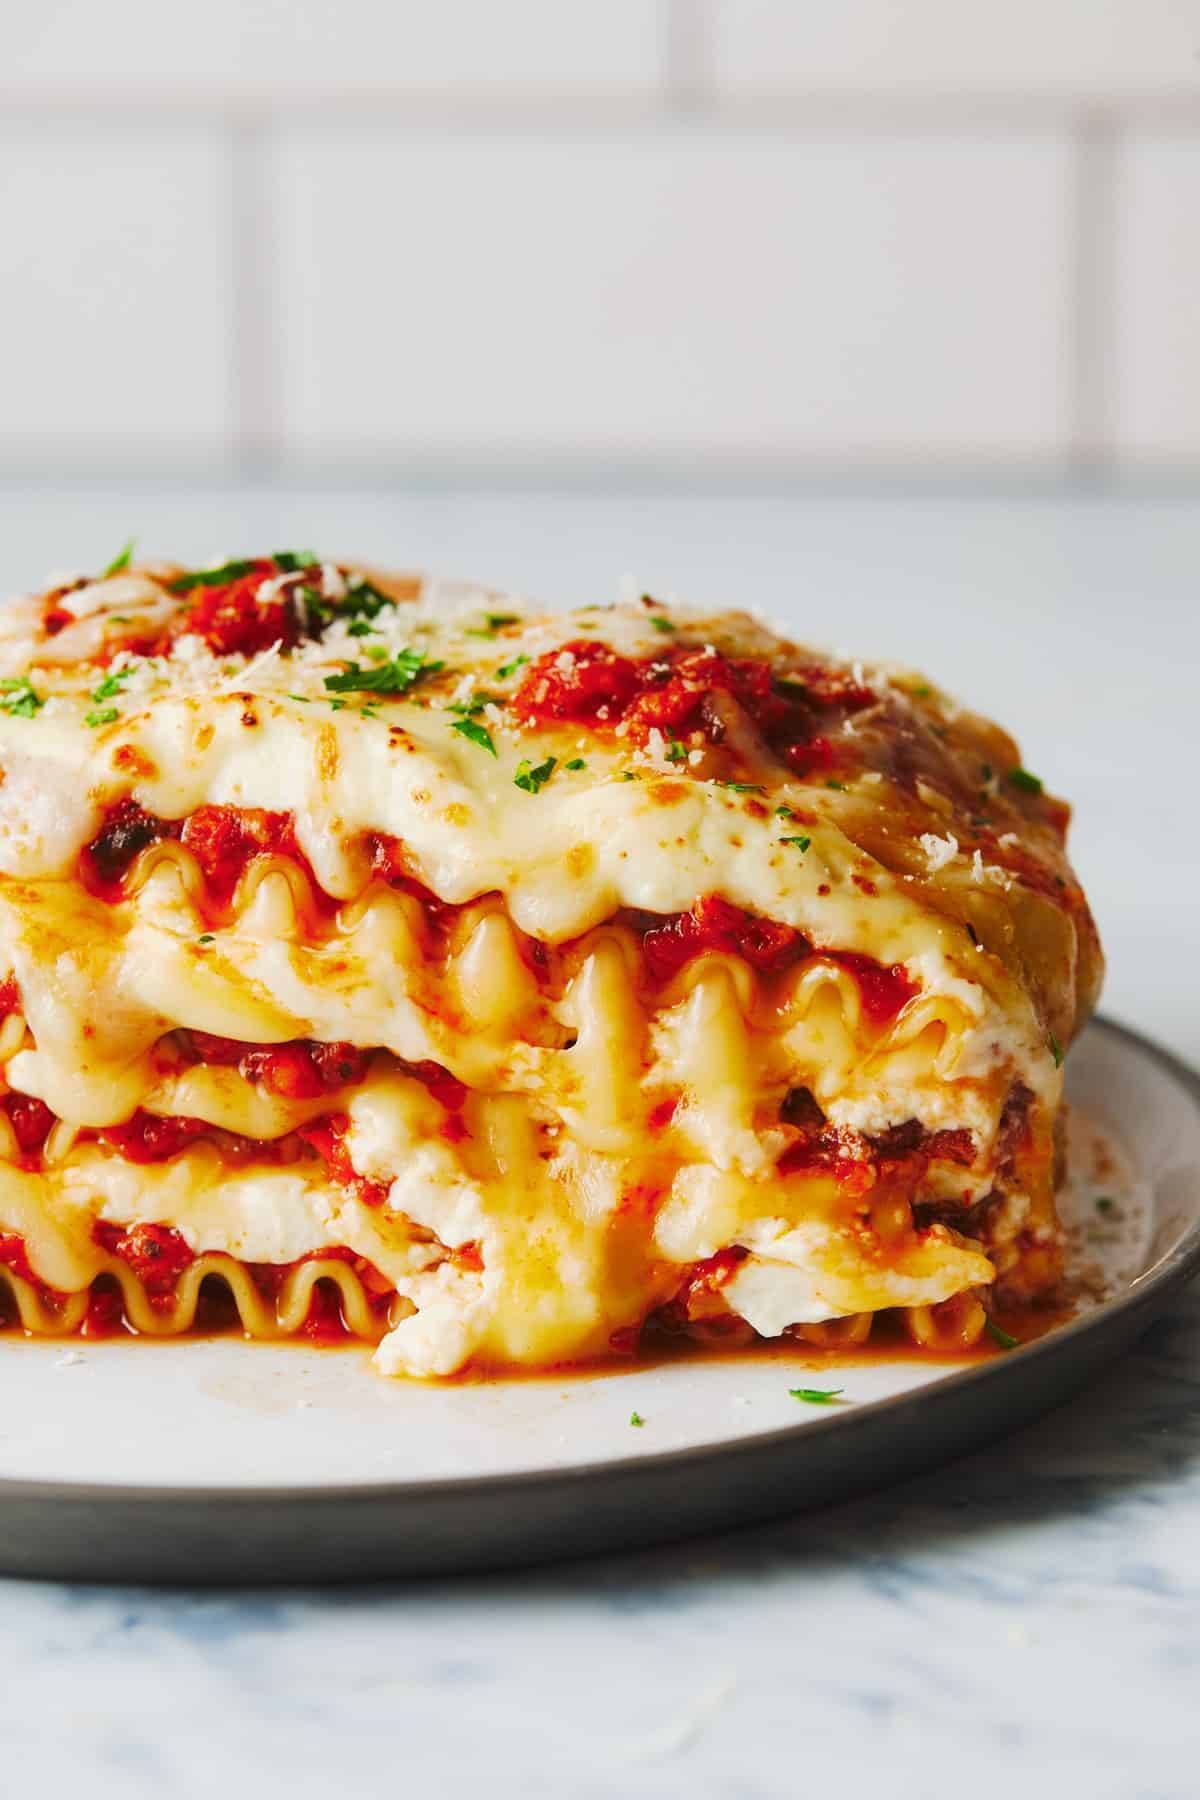 Lasagna oozing cheese on a plate.